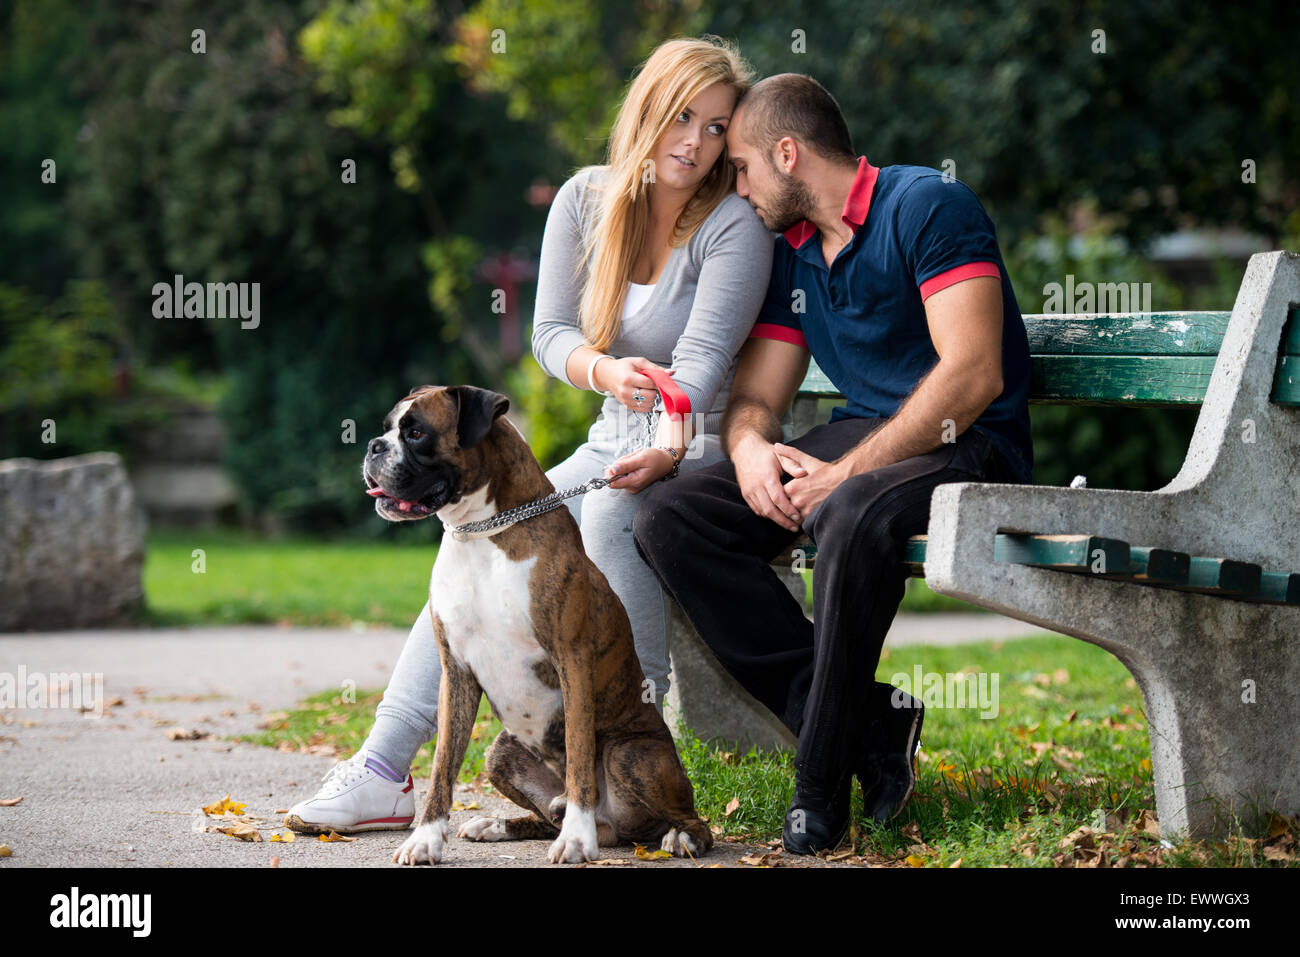 Pretty Young Family With Dogs Stock Photo